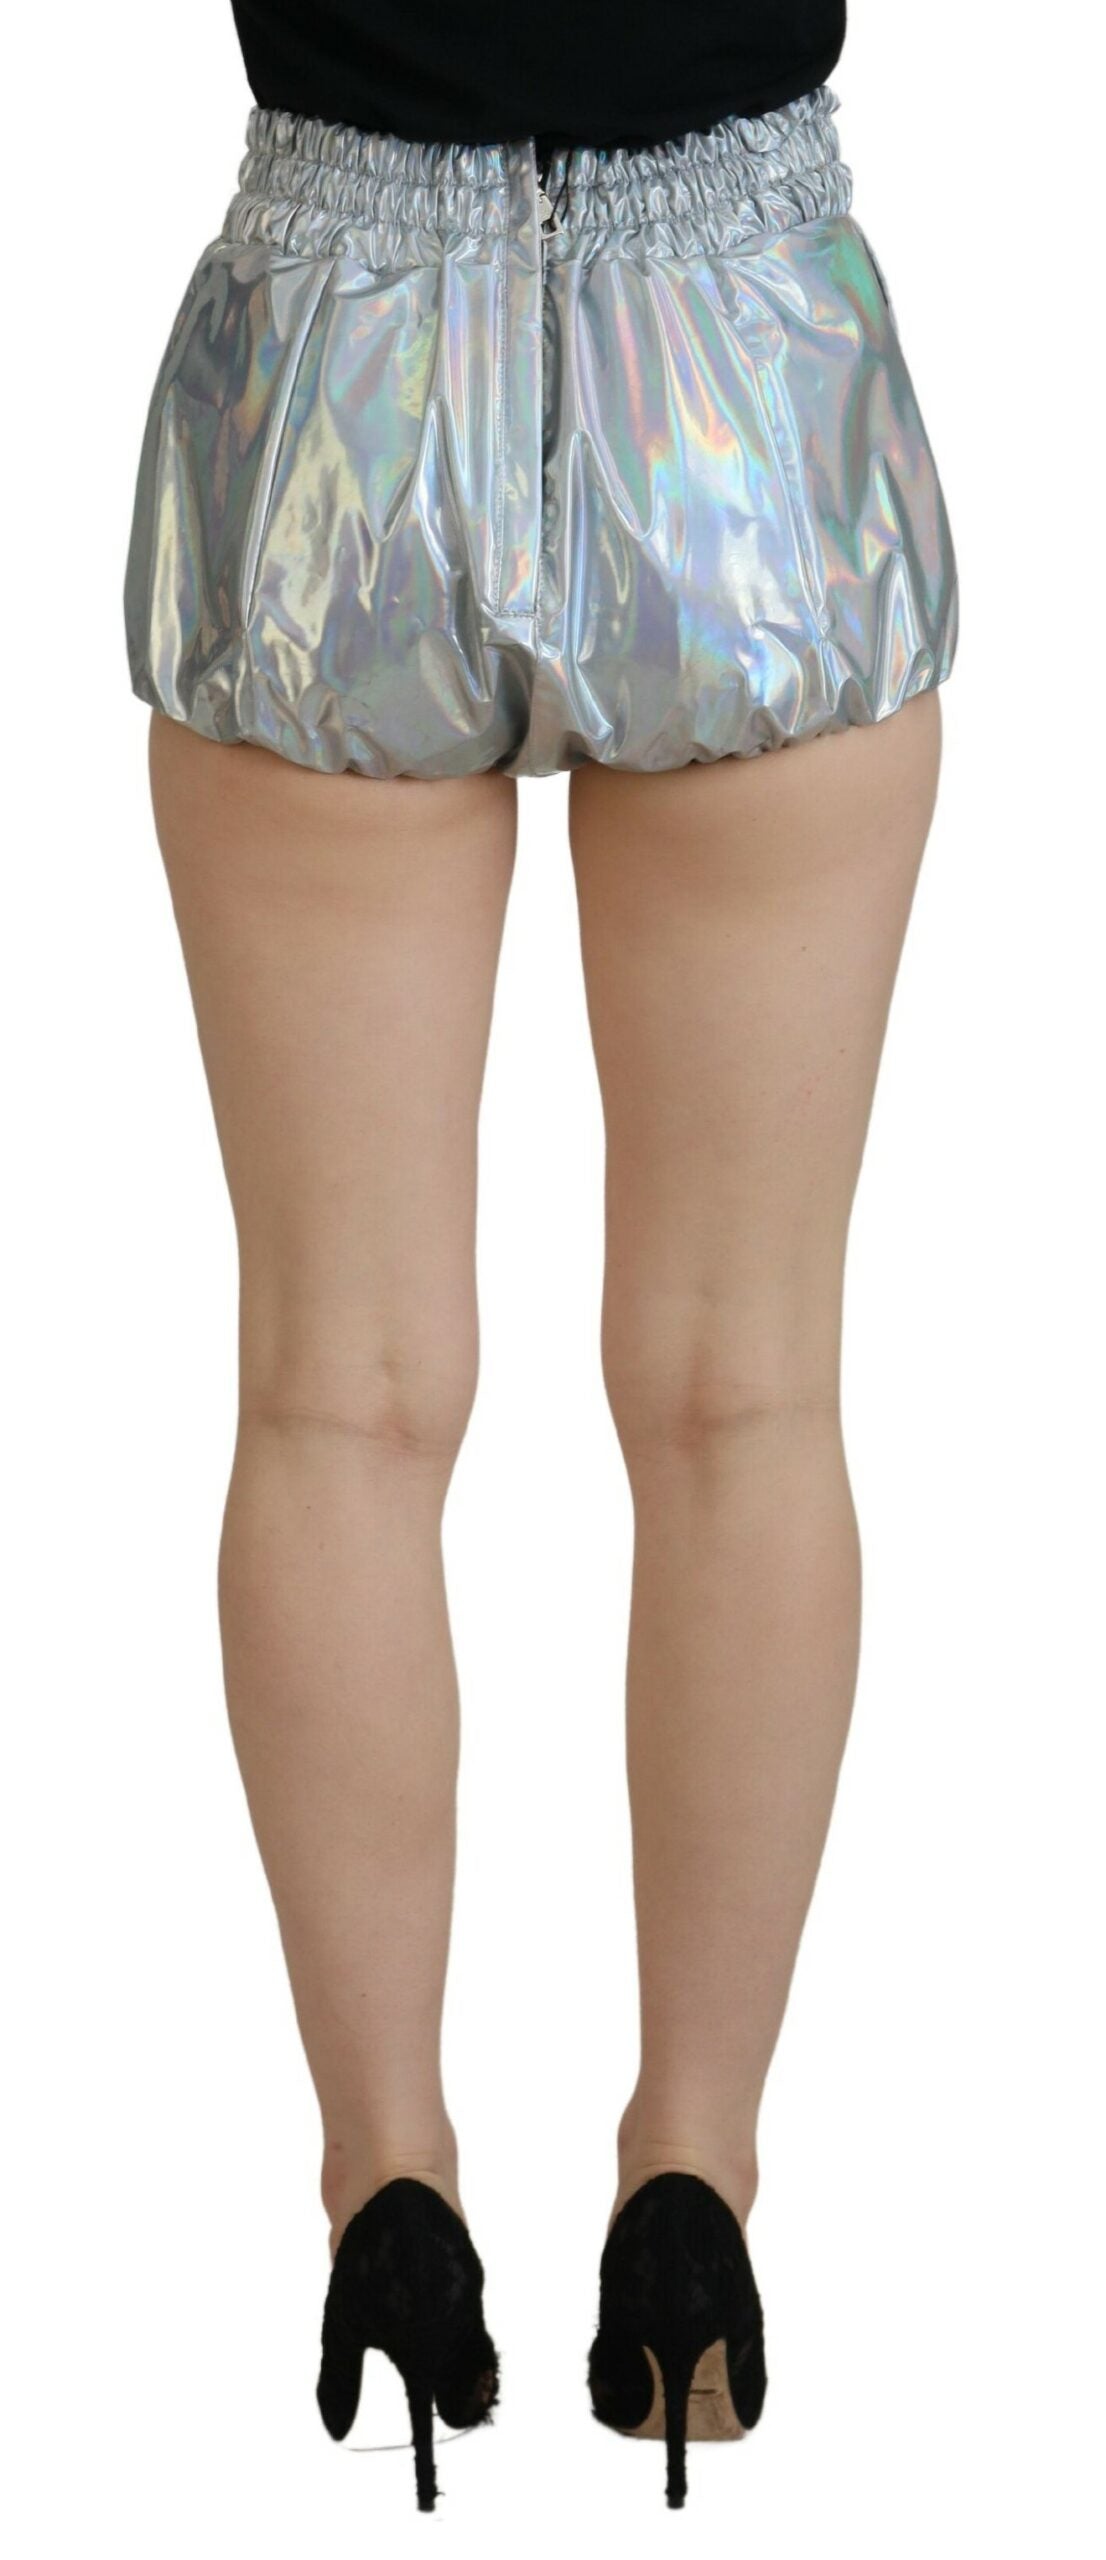 Silver Holographic High Waist Hot Pants Shorts